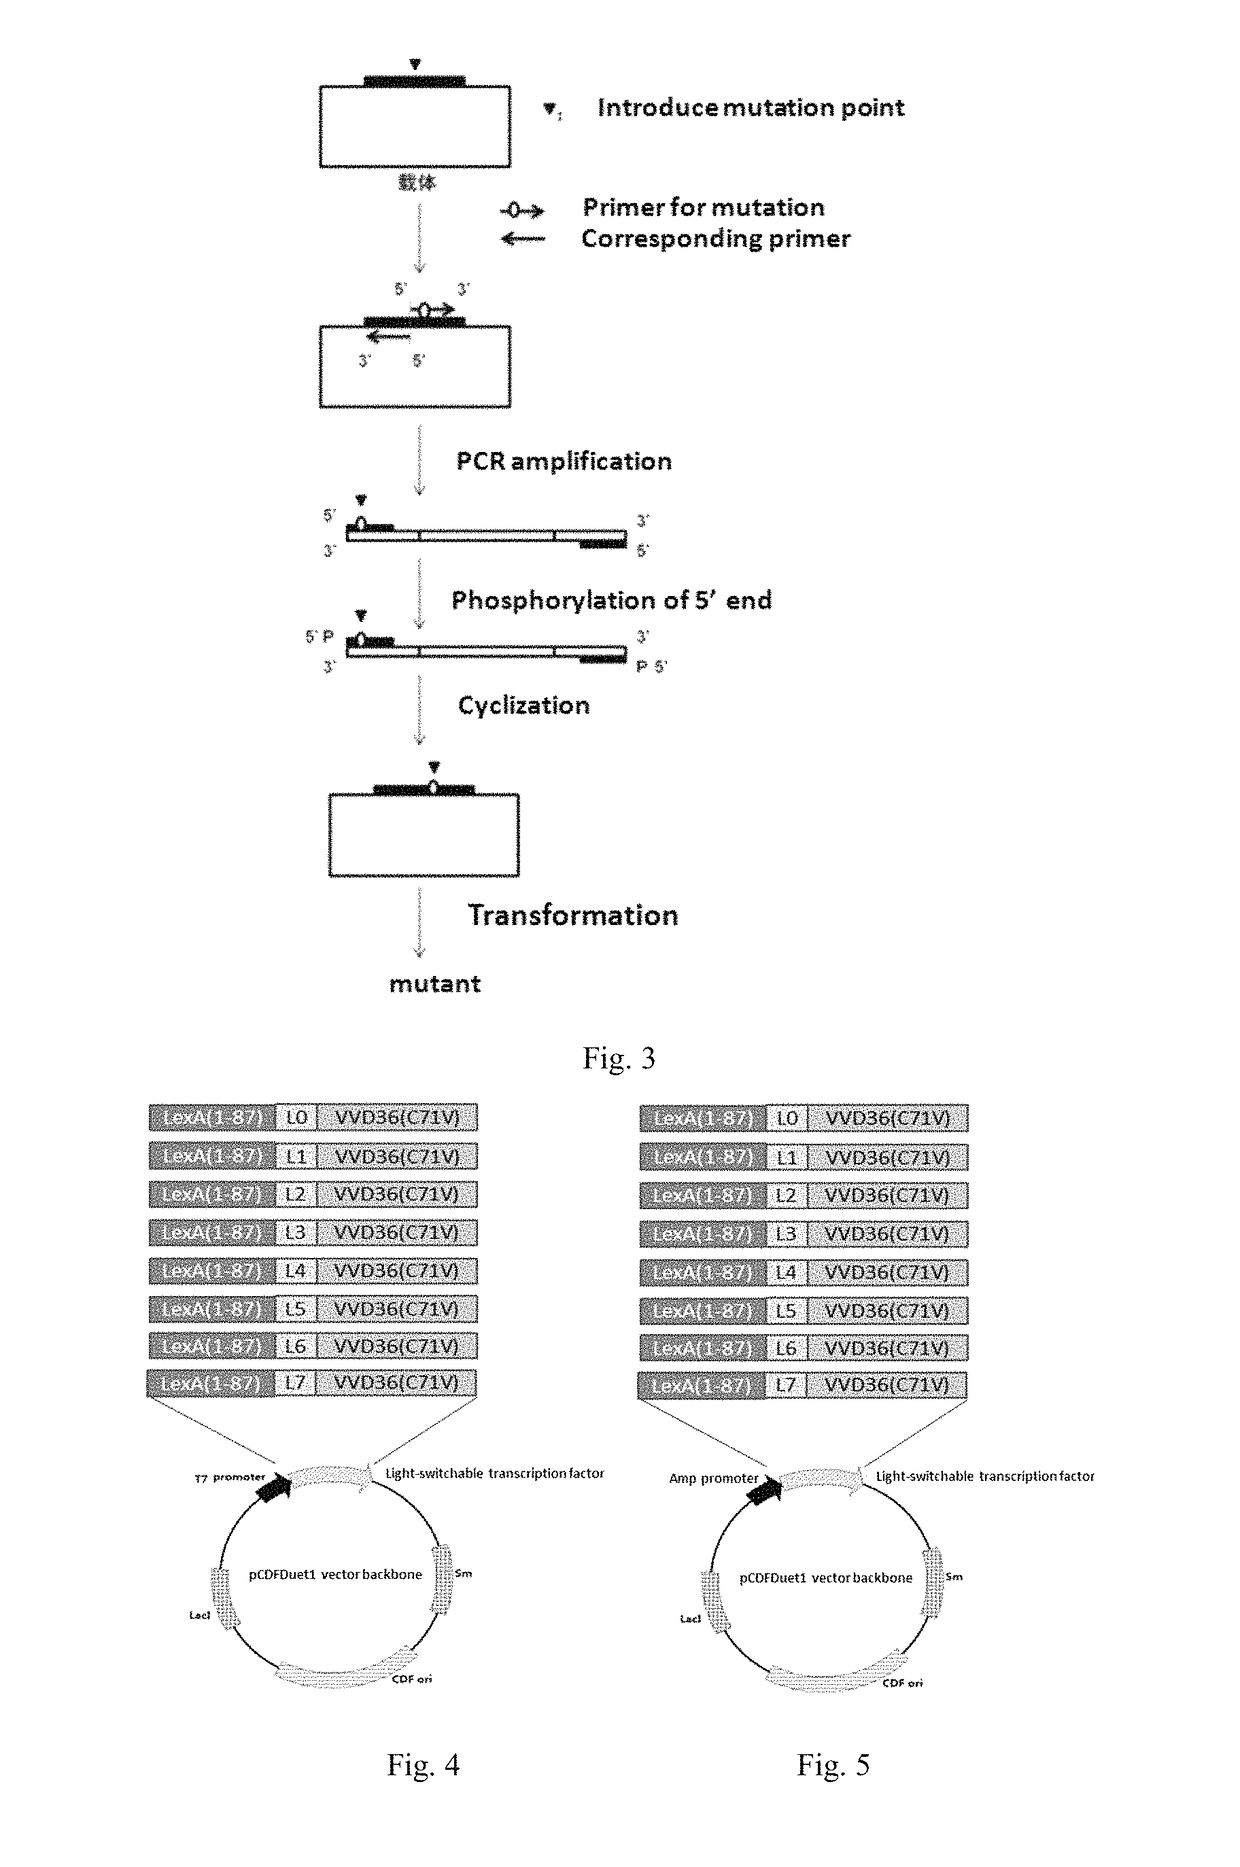 Light-switchable gene expression system and the methods for controlling gene expression in prokaryotic bacterium